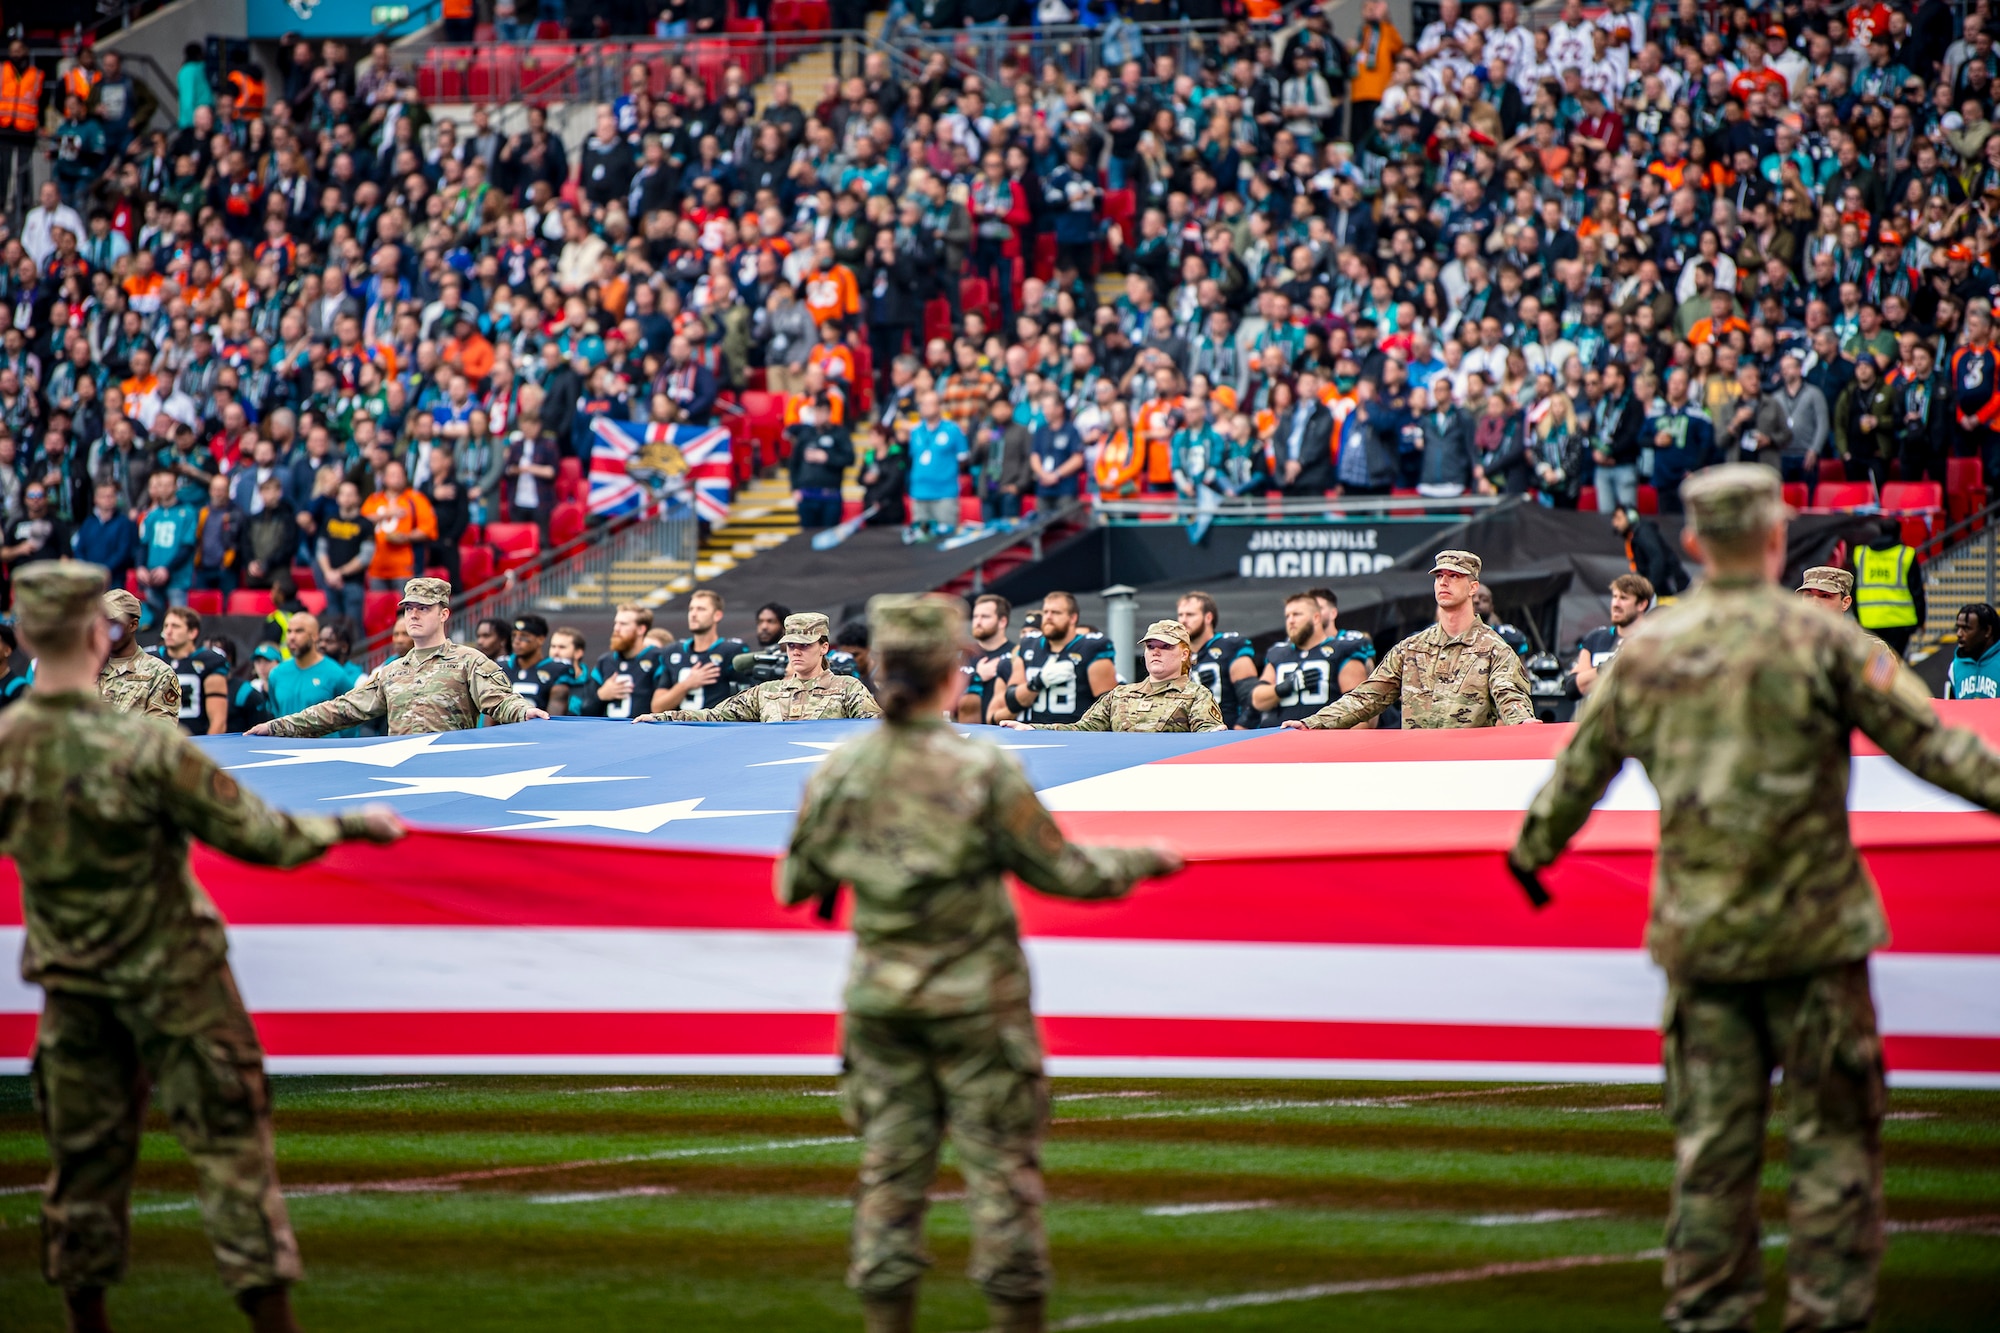 Airmen from the 501st Combat Support Wing unveil an American flag during the national anthem at Wembley Stadium, in London, England, Oct. 30, 2022. Approximately 70 uniformed personnel represented the U.S. Air Force and nation by unveiling an American flag during the pre-game ceremonies of the Jacksonville Jaguars and Denver Broncos NFL game. (U.S. Air Force photo by Staff Sgt. Eugene Oliver)